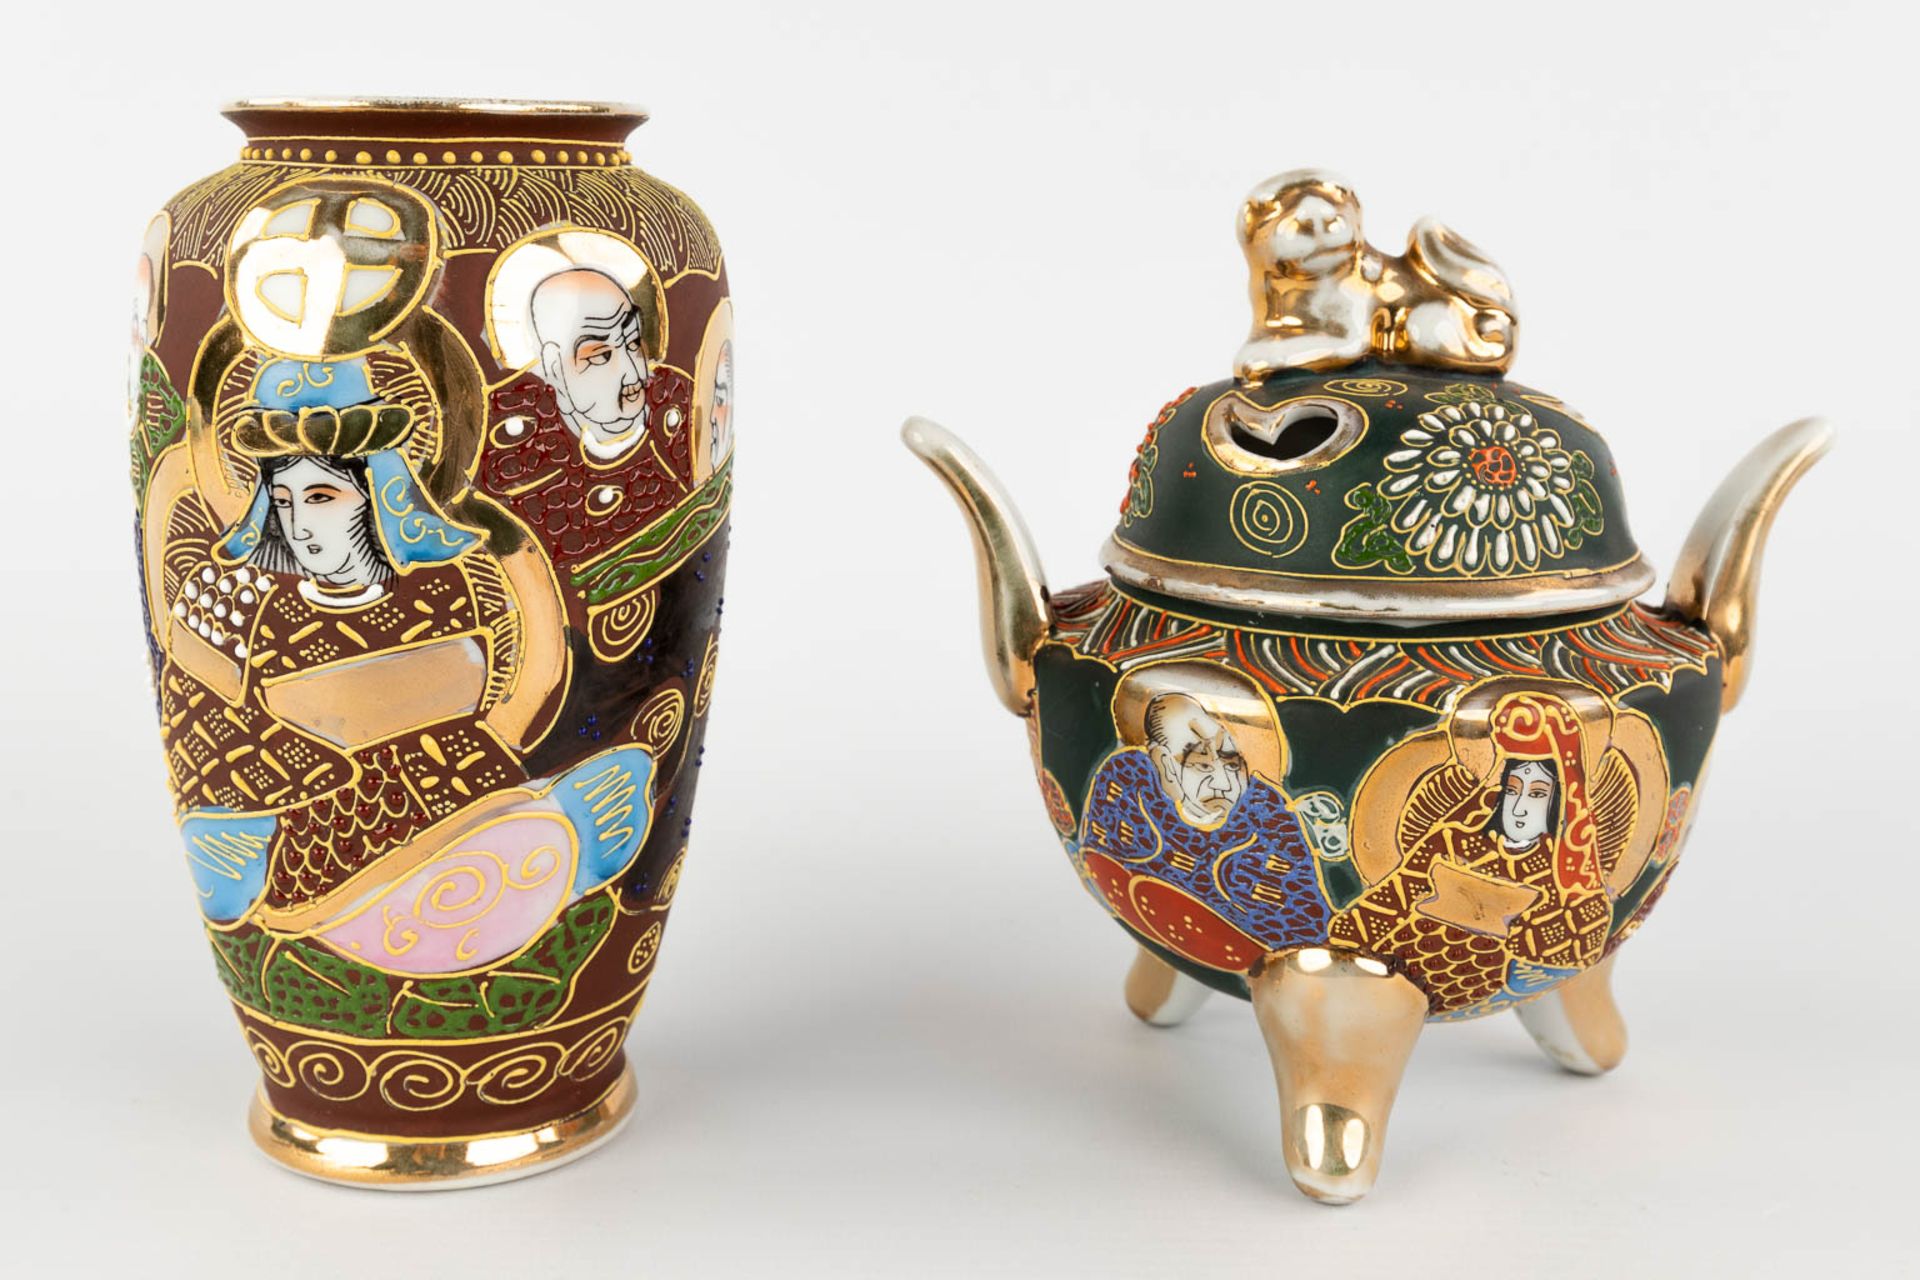 A pair of vases, a vase and jar with lid, Satsuma faience, Japan. 20th C. (H:31 x D:19 cm) - Image 12 of 19